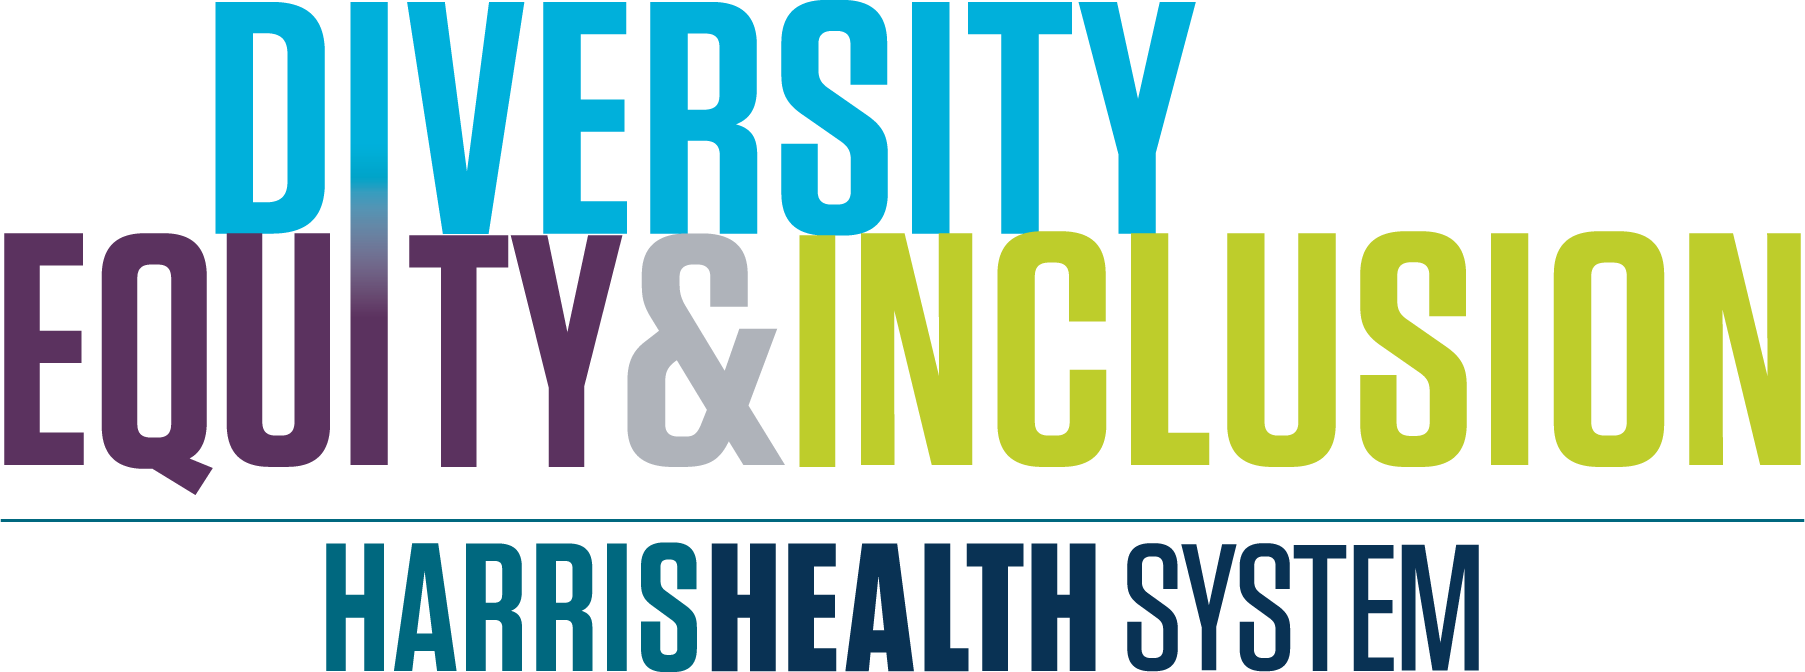 Diversity, Equity, and Inclusion logo